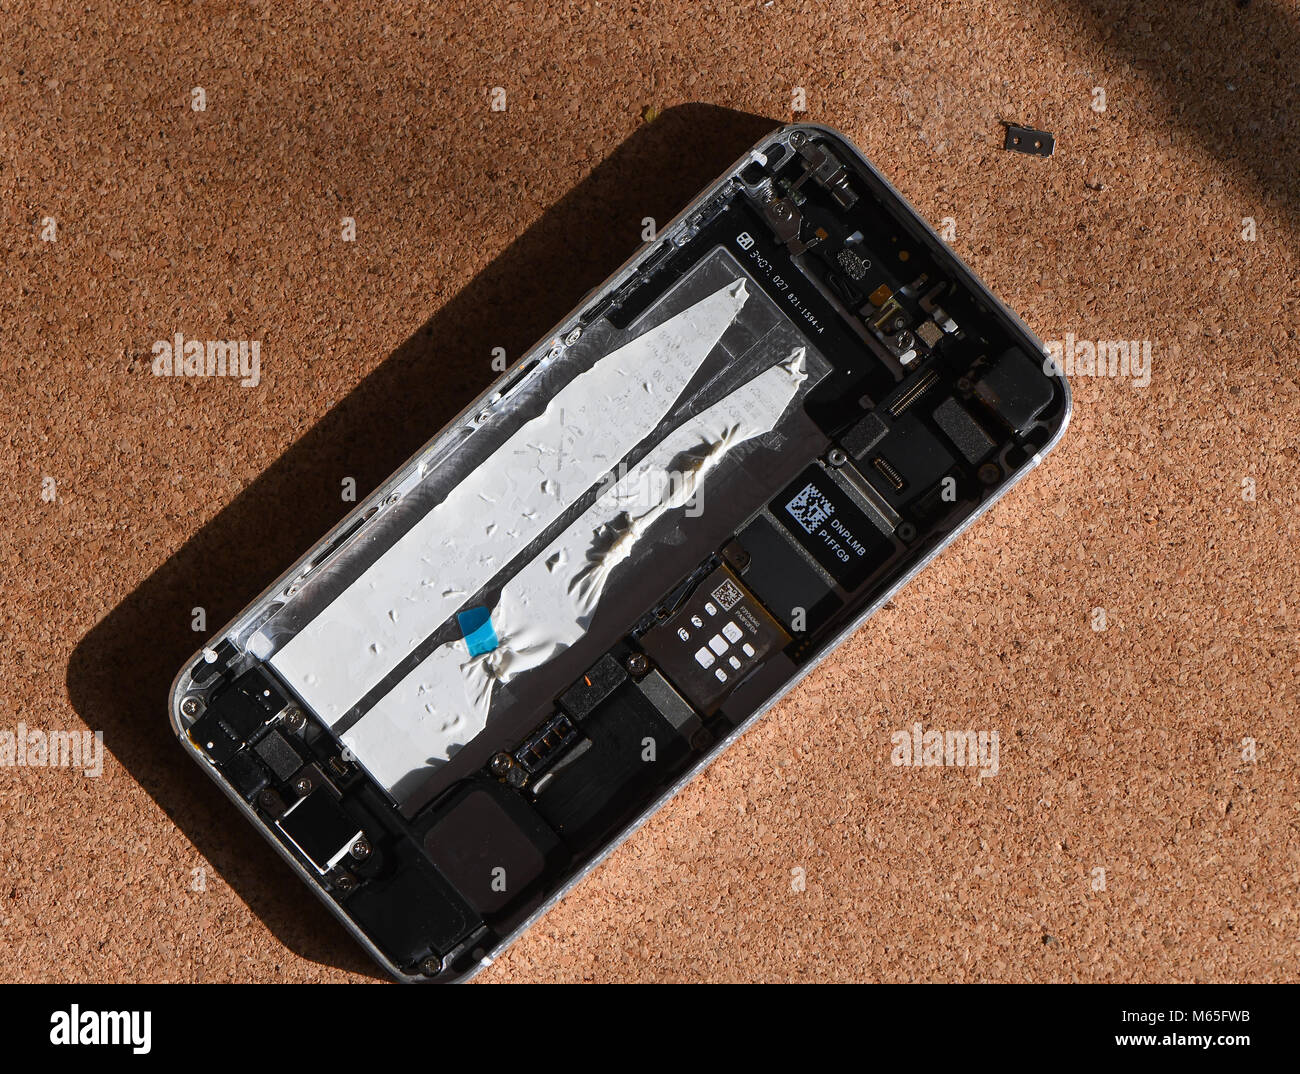 Home DIY replacement of a iPhone 5s battery showing phone opened with new and old battery and internals of phone. Stock Photo